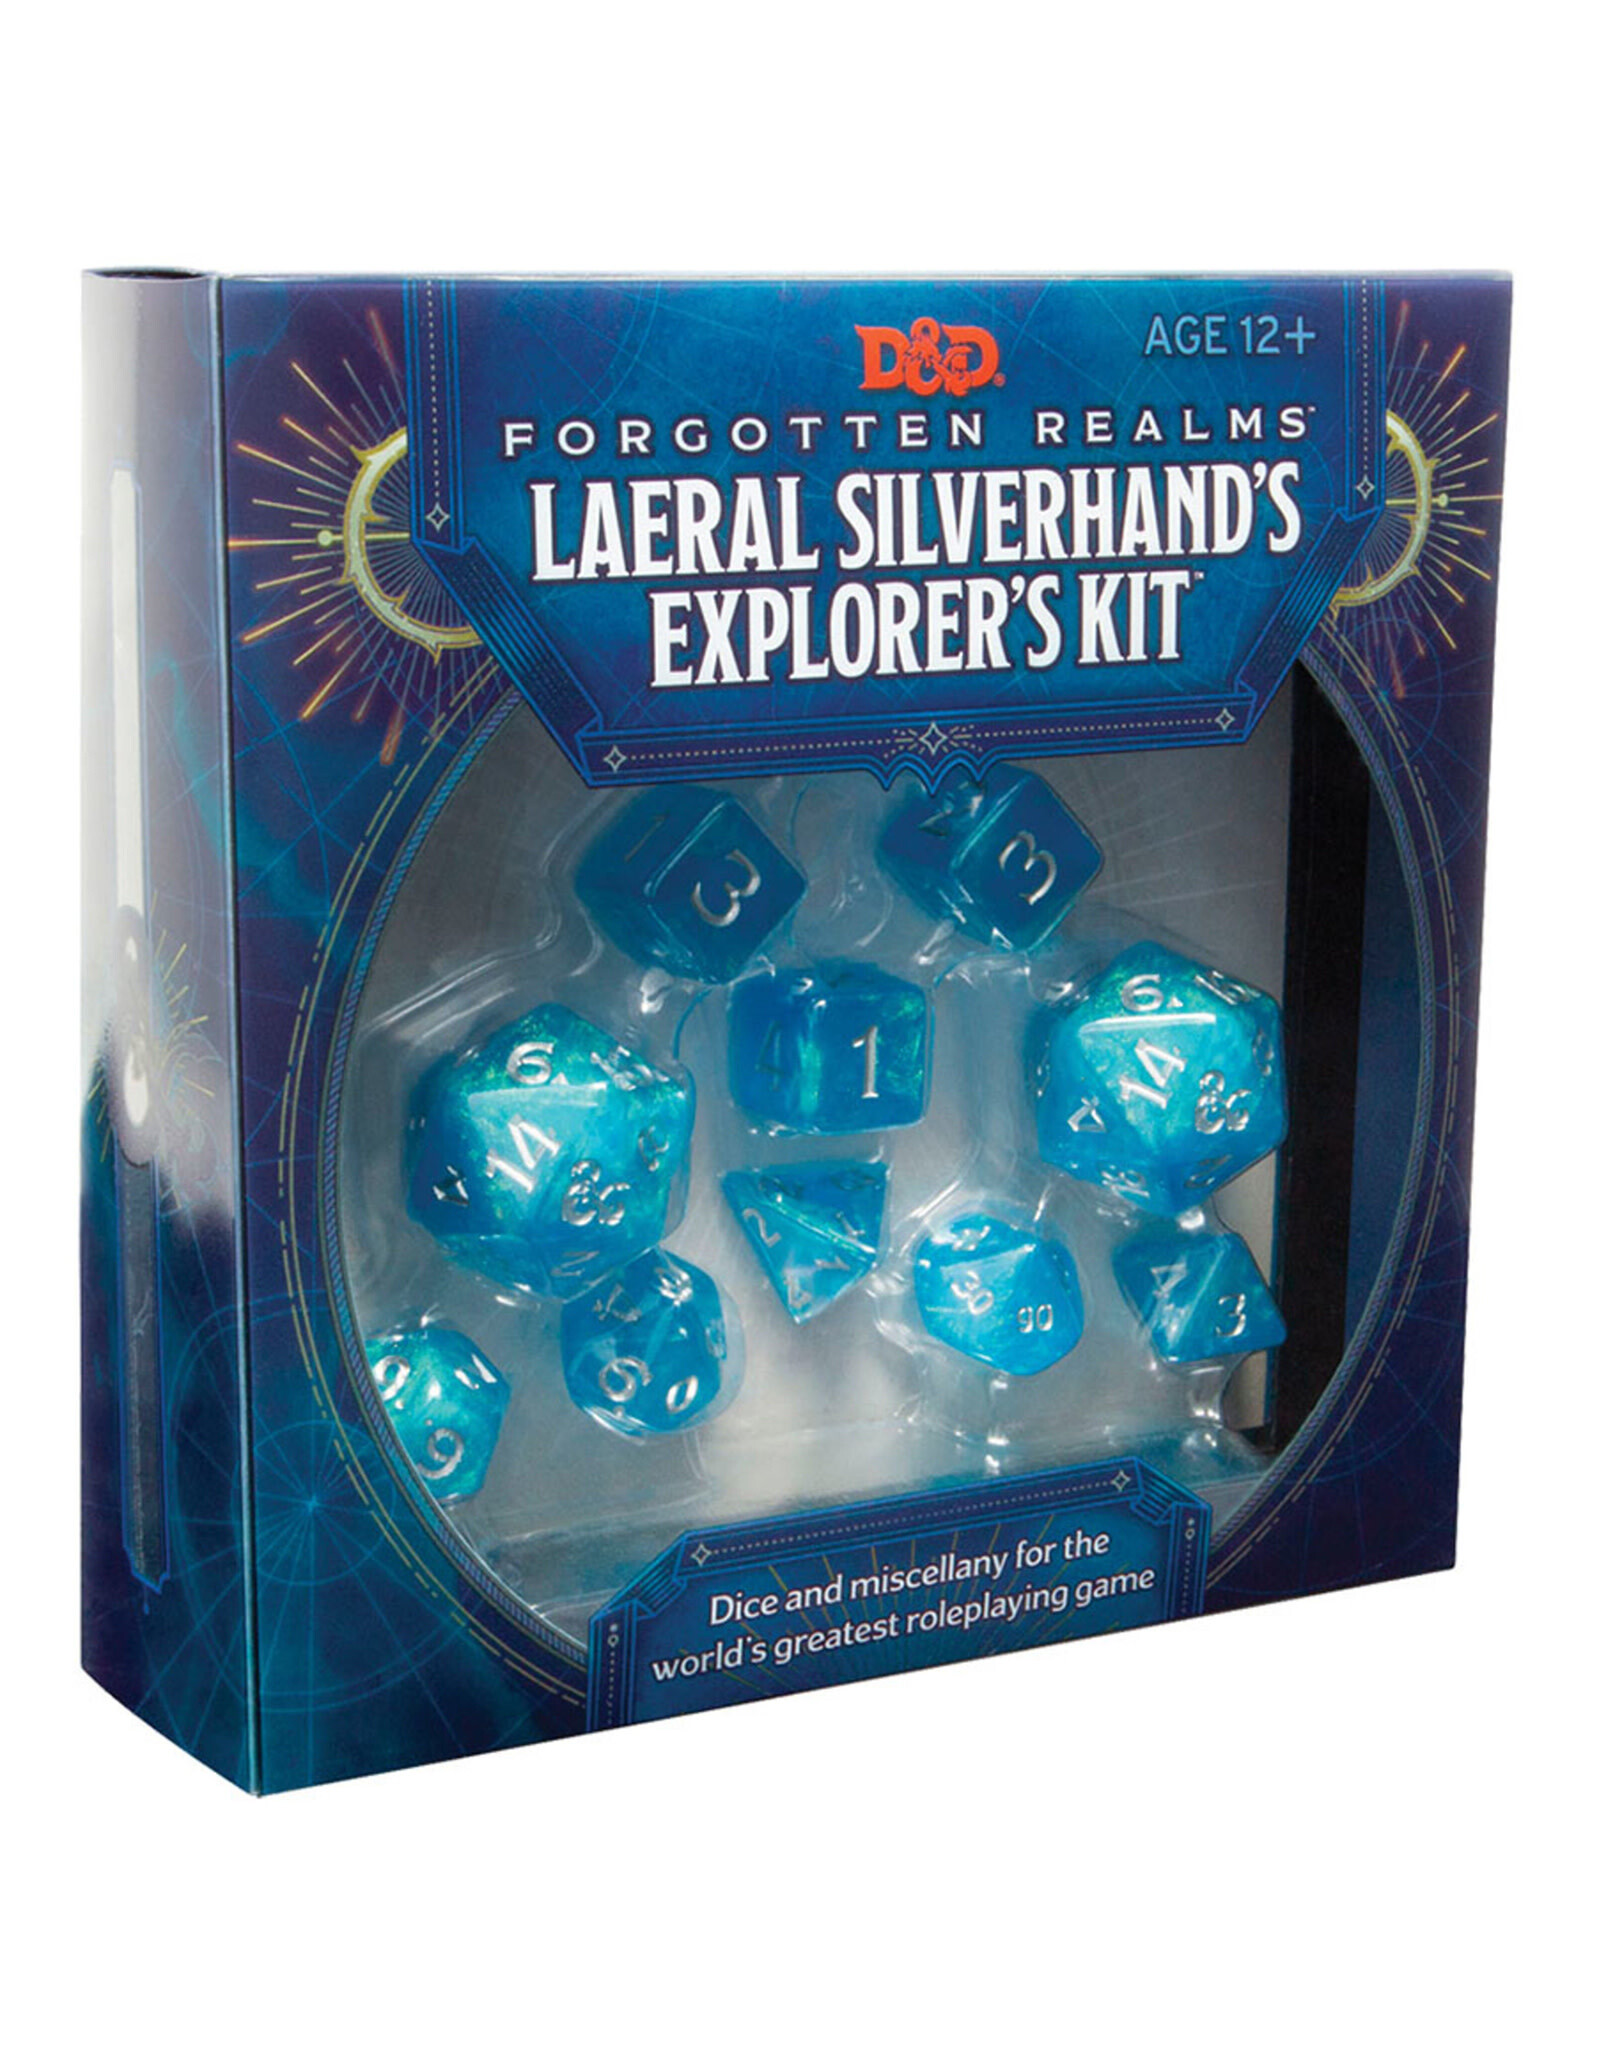 Dungeons & Dragons RPG: Forgotten Realms Laeral Silverhands Explorers Kit